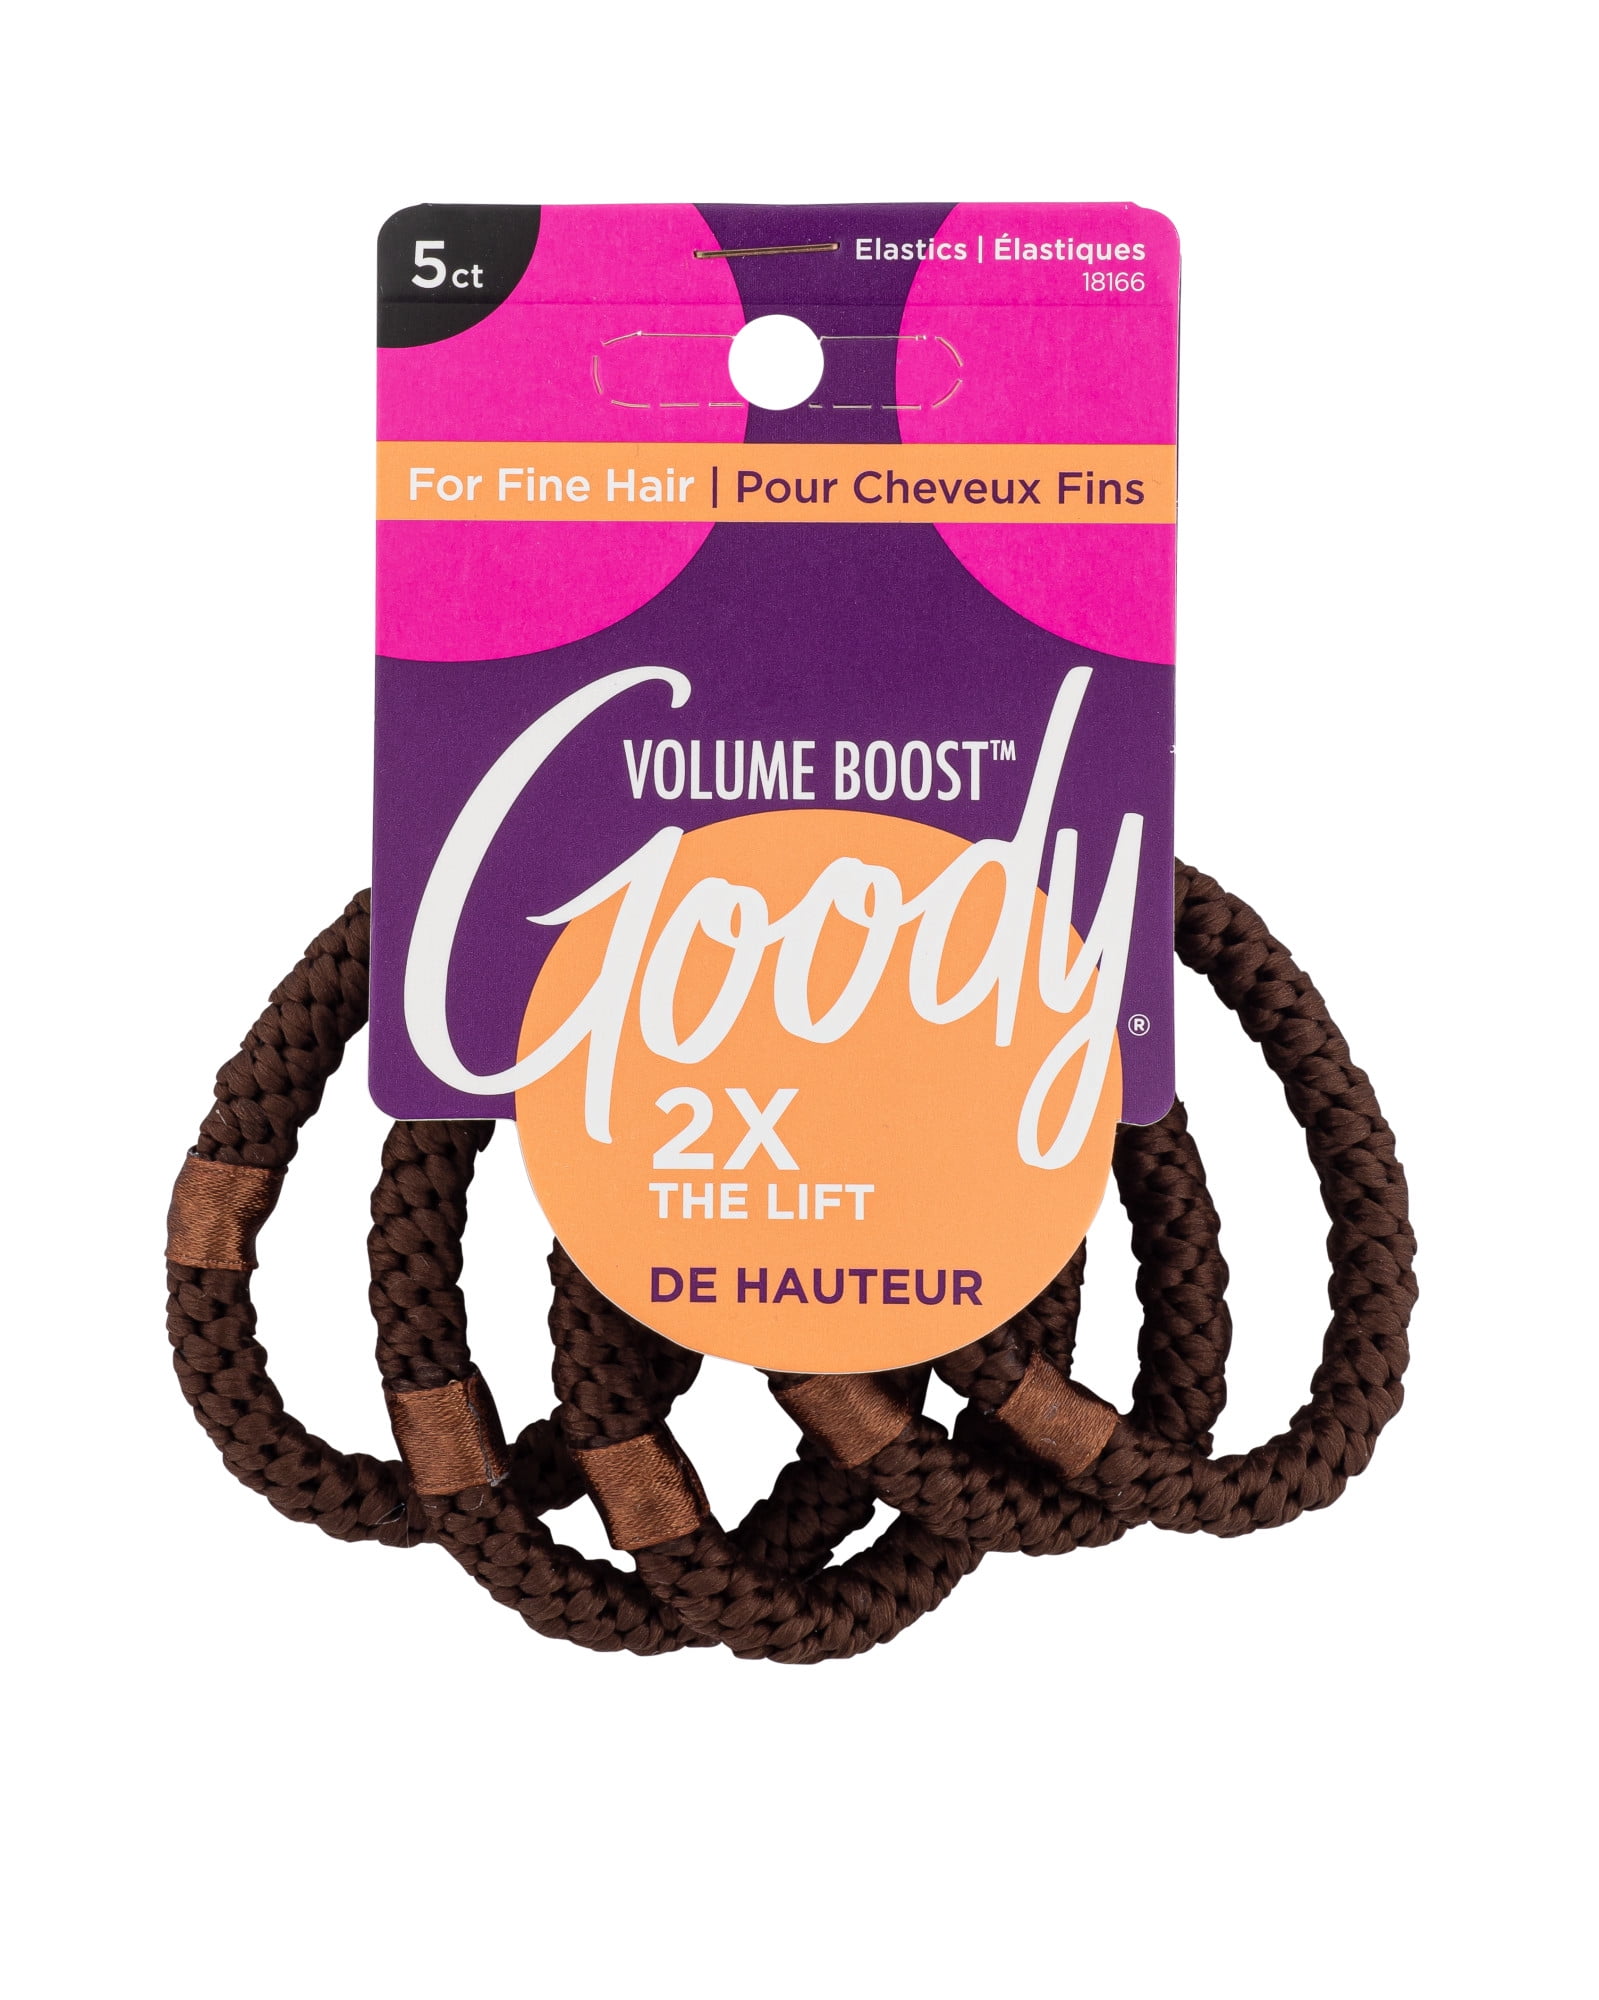 Goody Volume Boost Ouchless Brown Ponytailers Elastics for Fine Hair, 5 CT